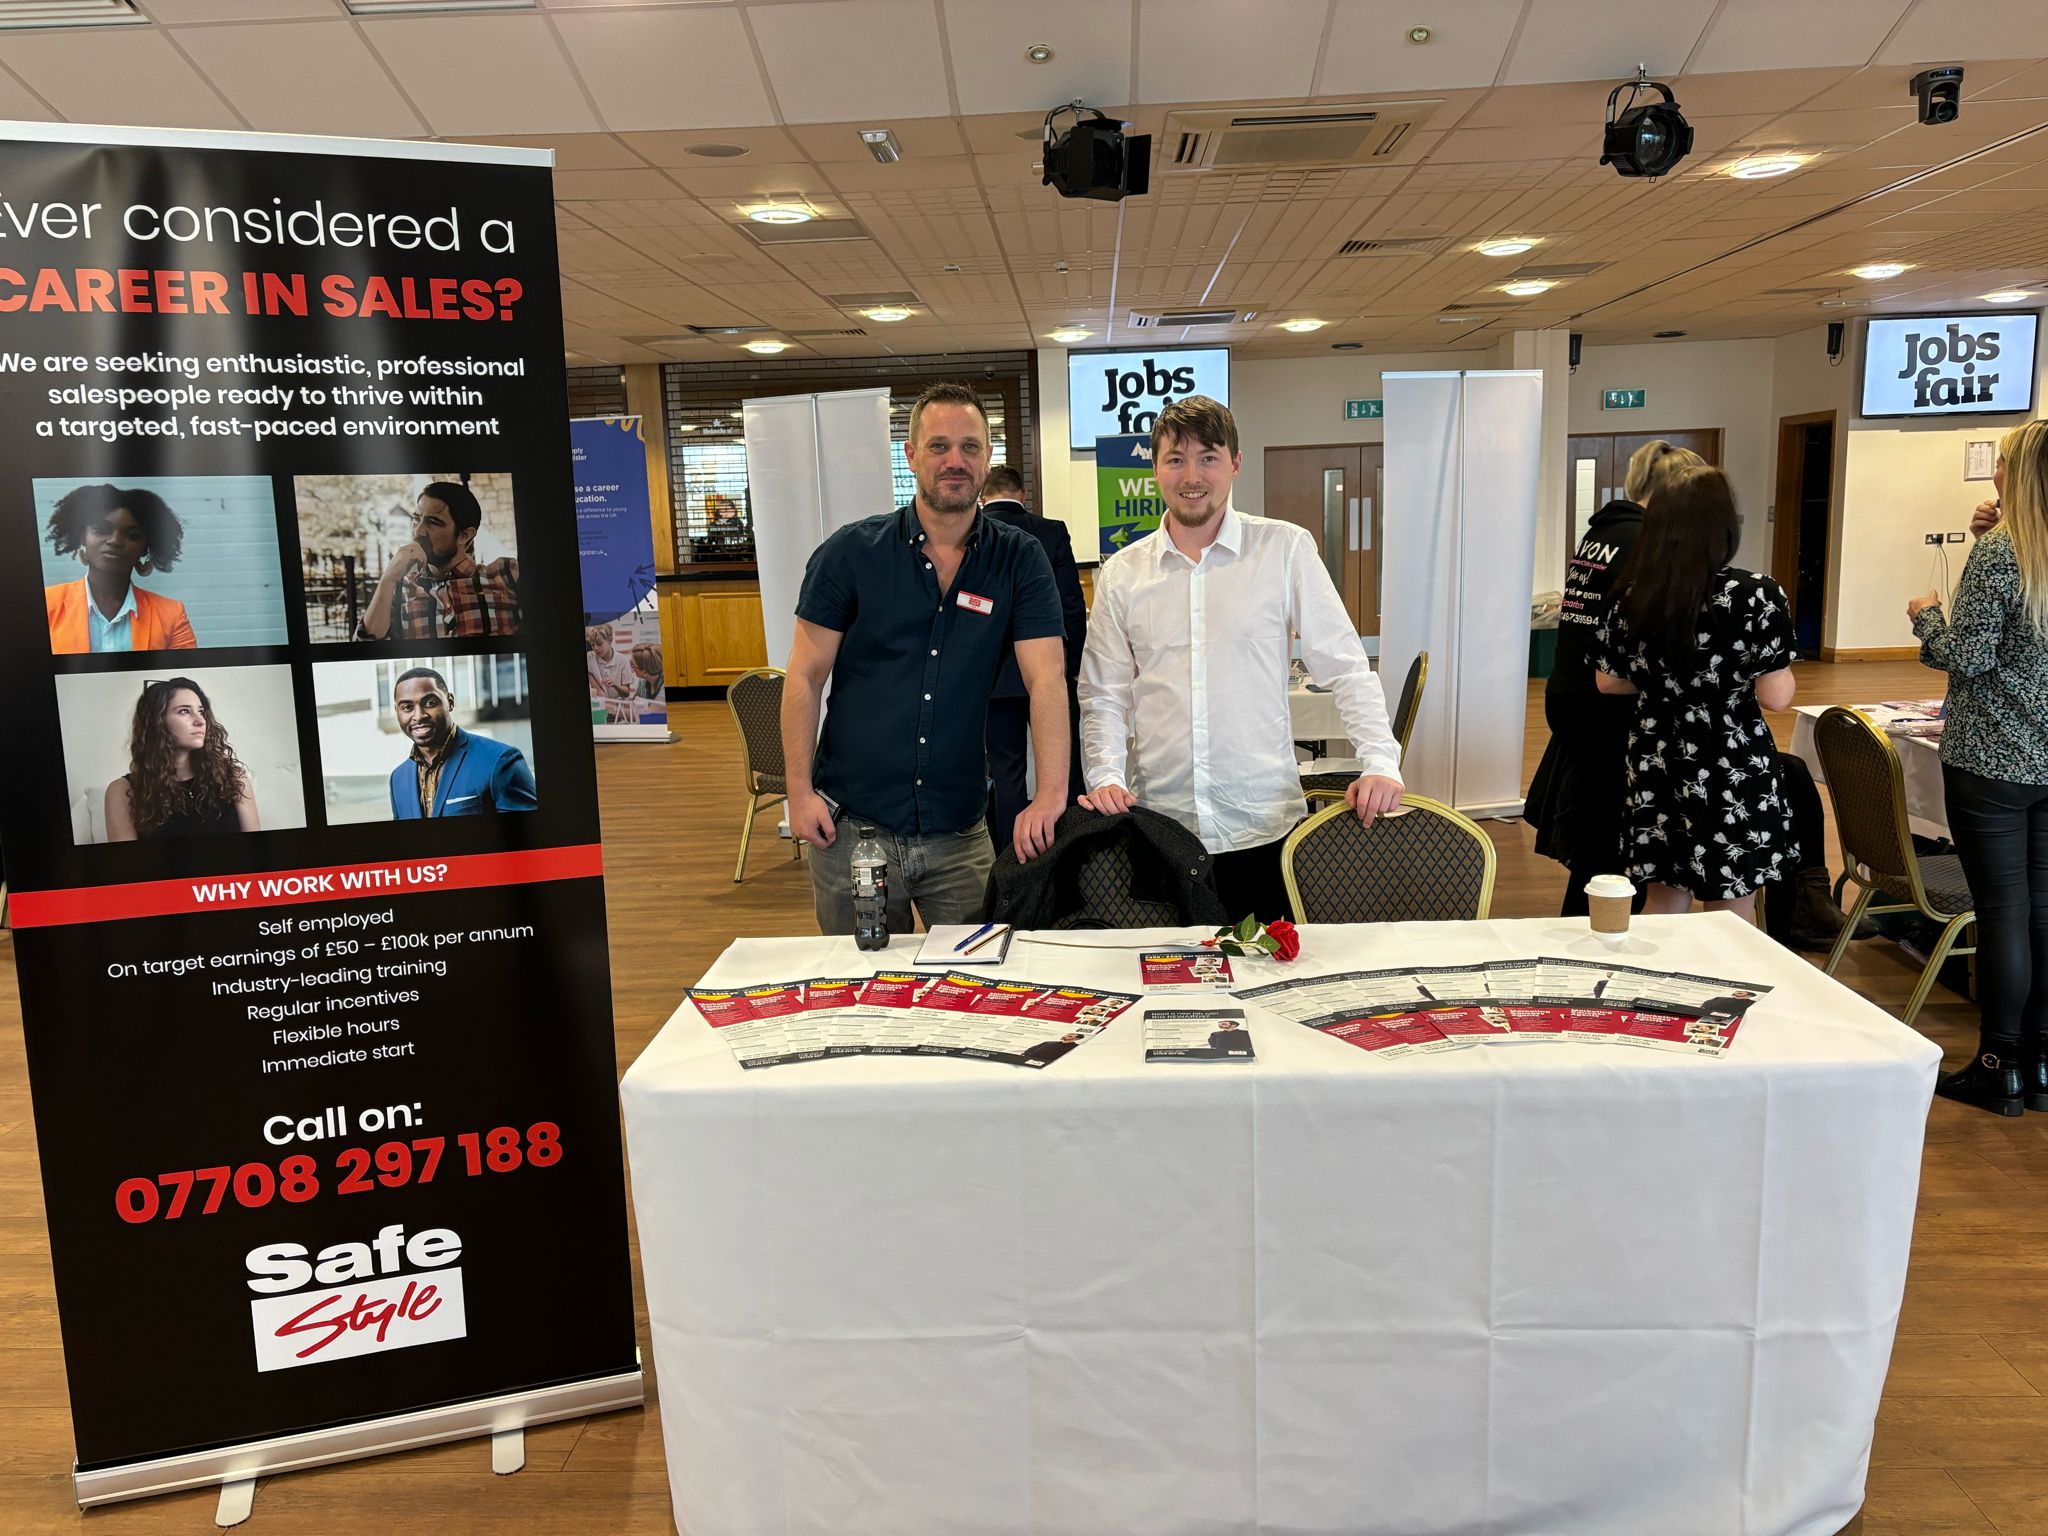 Safestyle UK at our event in Exeter